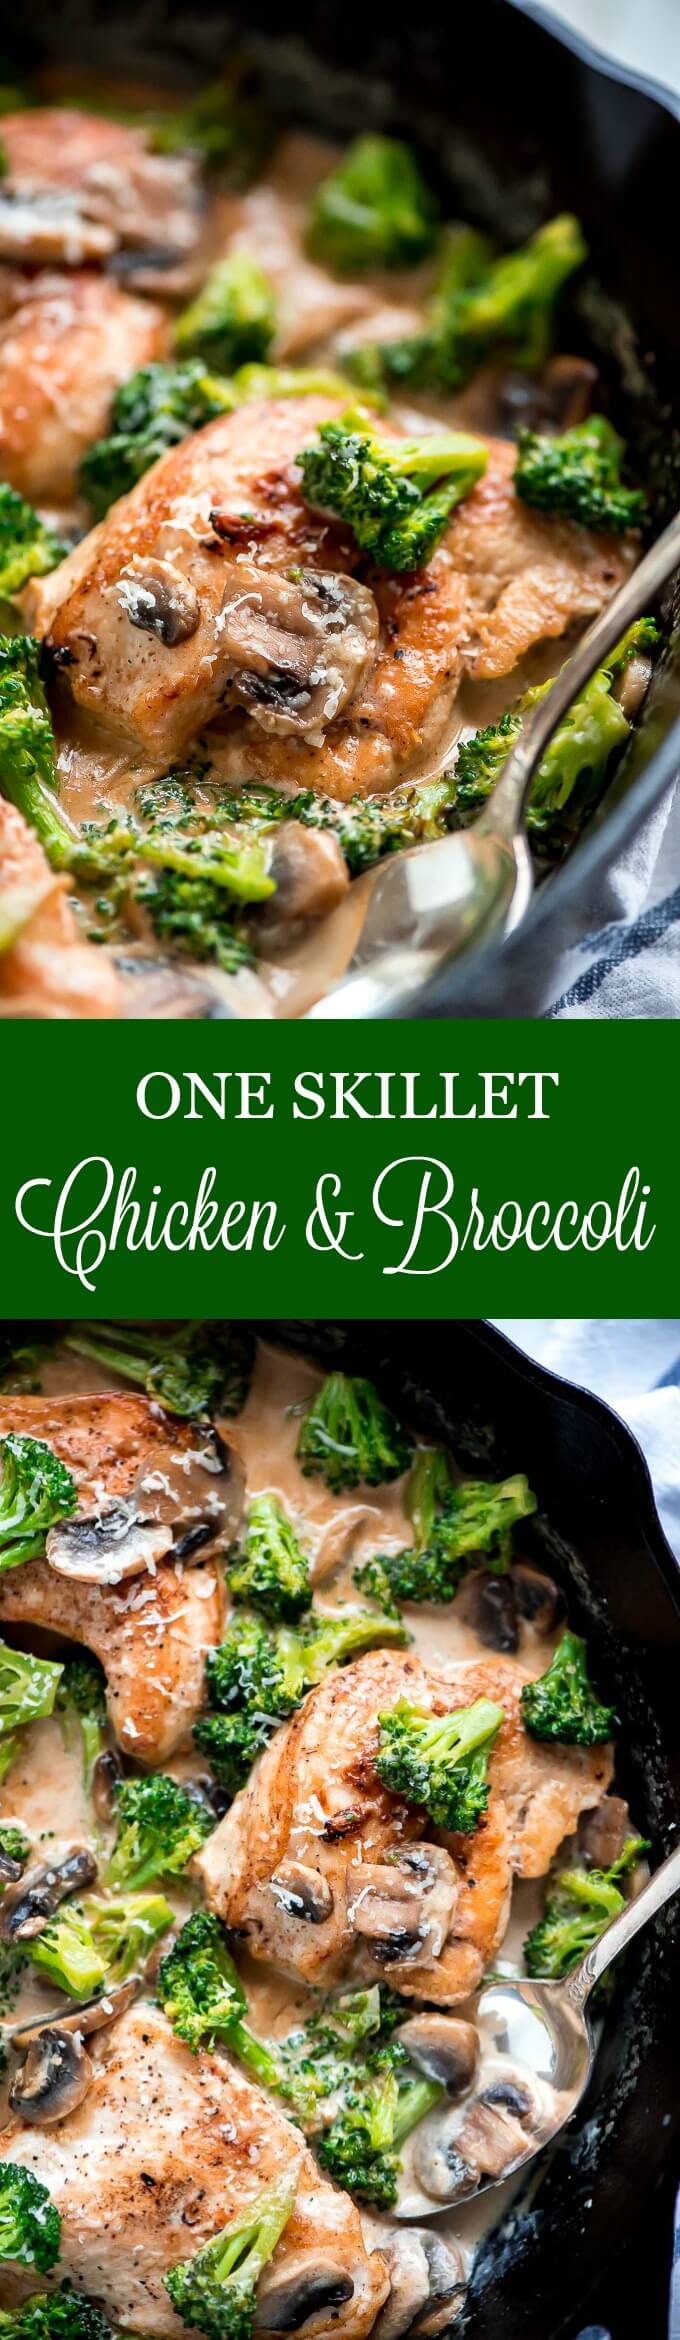 One Skillet Chicken and Broccoli is a super quick, creamy, delicious dinner that comes together in just 20 minutes and is even faster to clean up.